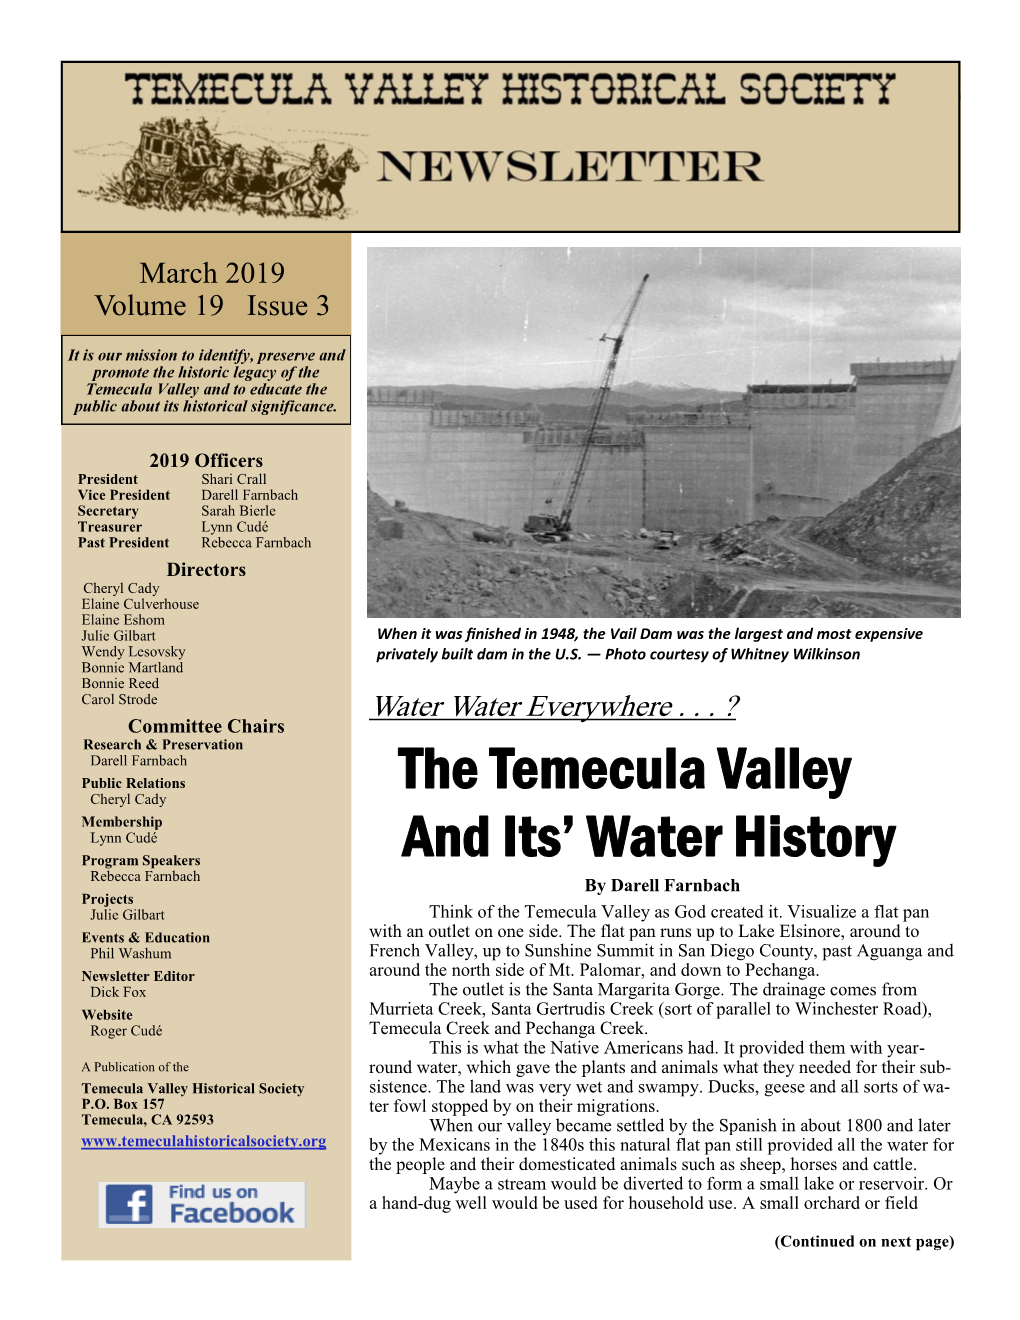 The Temecula Valley and Its' Water History